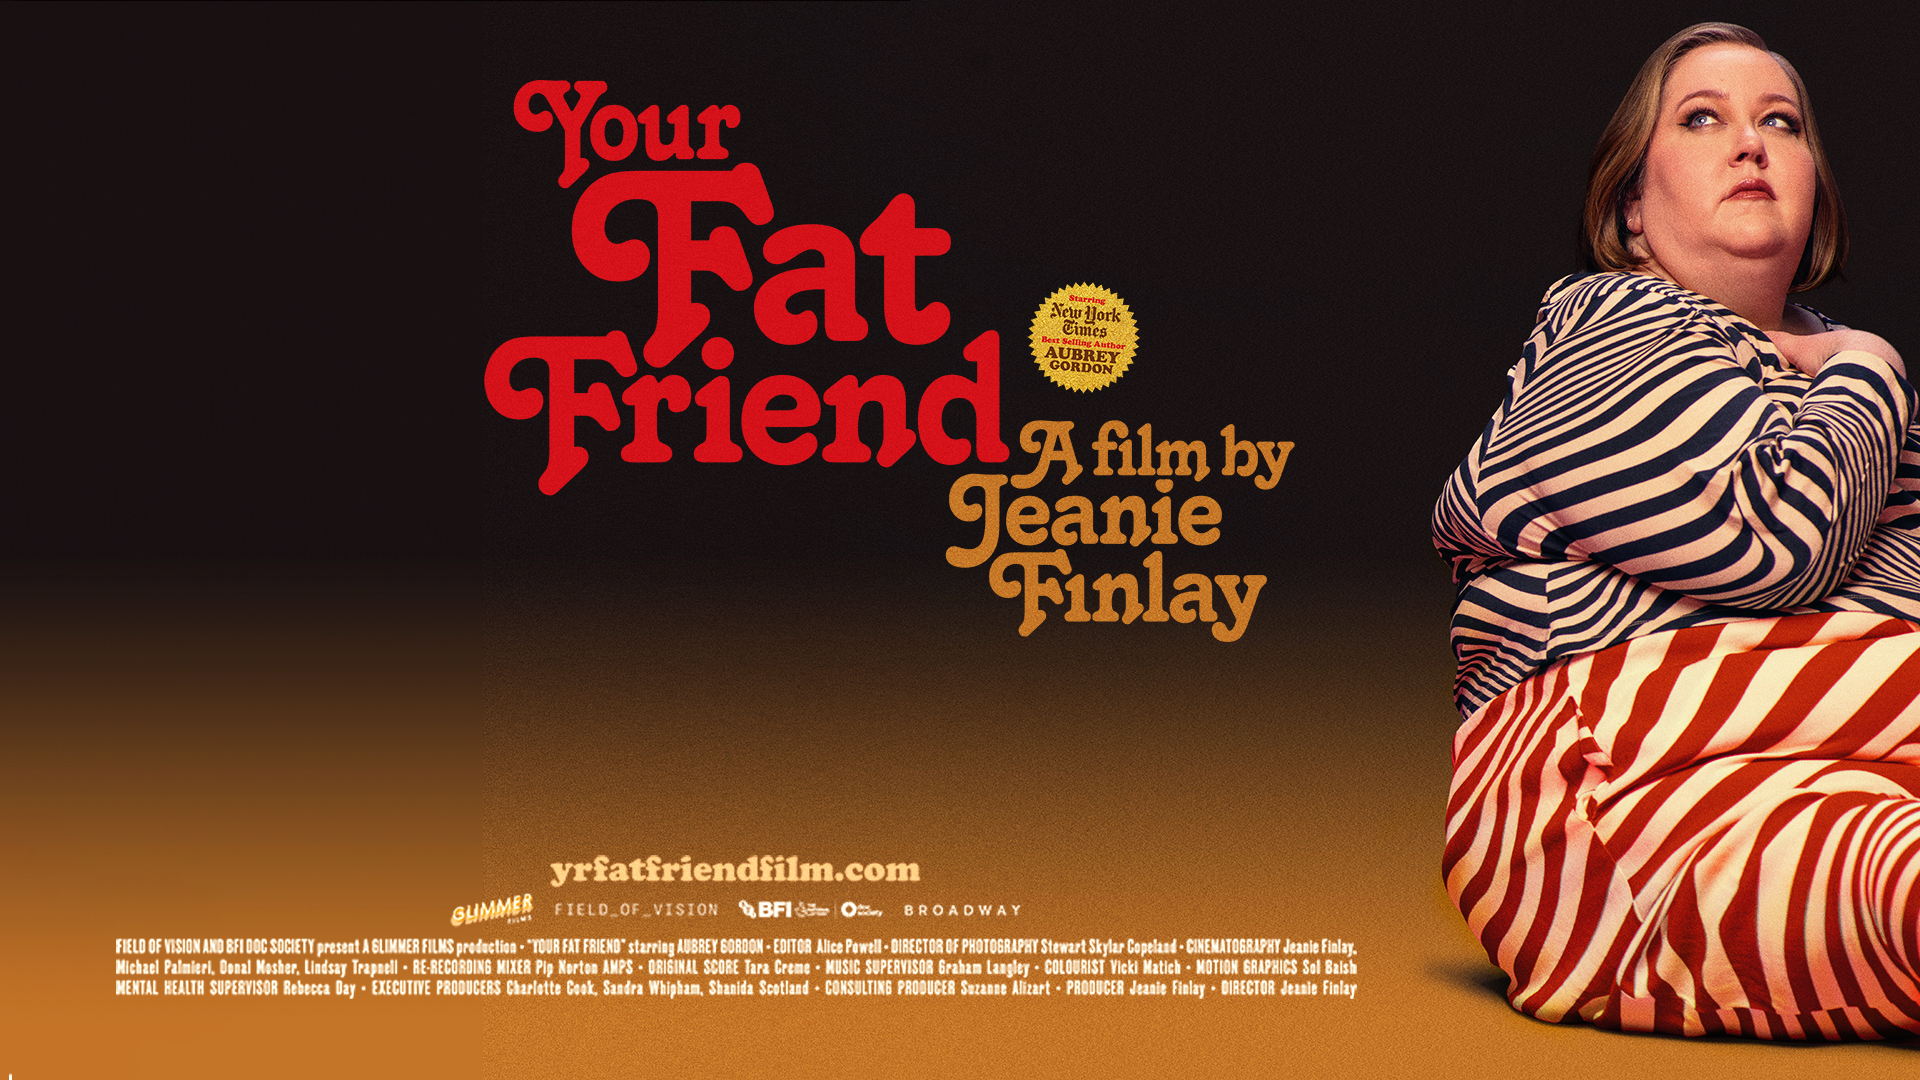 Your Fat Friend poster